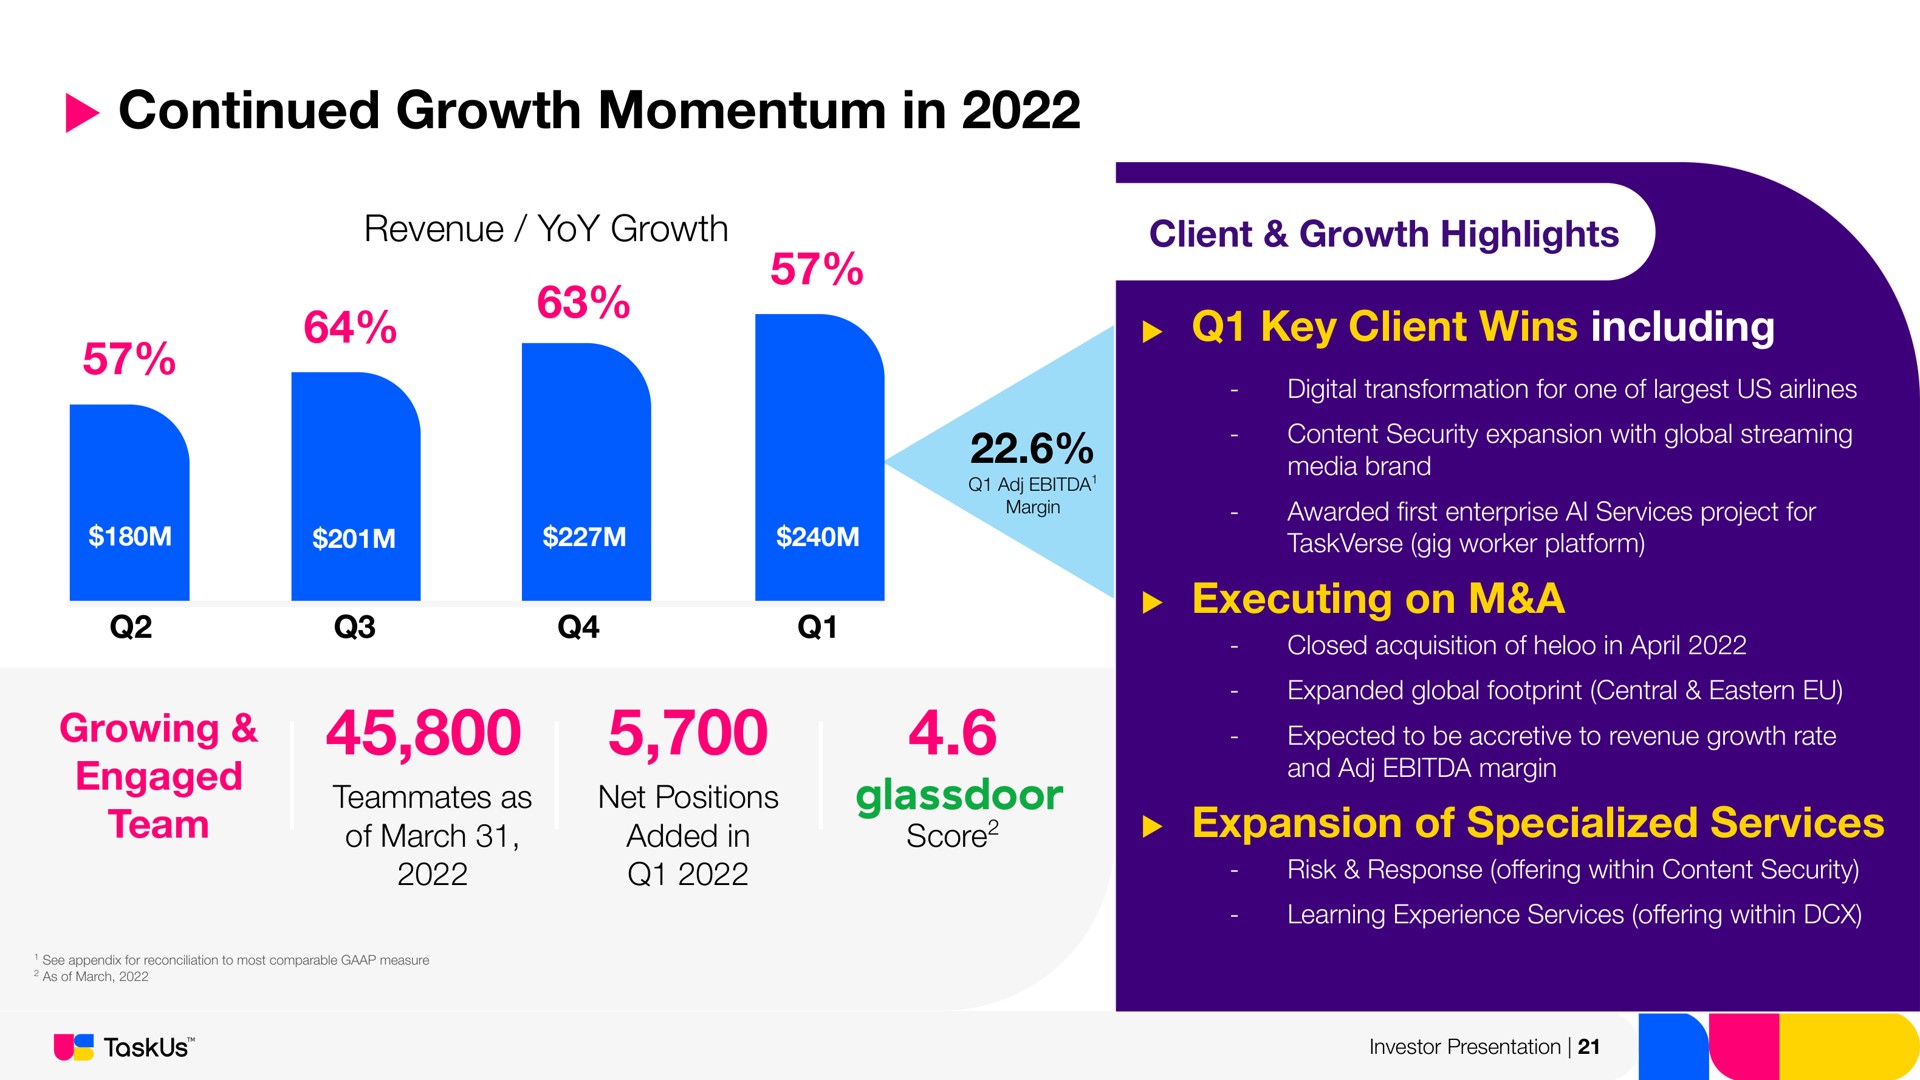 continued growth momentum in revenue yoy growth growing engaged team teammates as of march net positions added in score client growth highlights key client wins including digital transformation for one of us content security expansion with global streaming media brand awarded enterprise services project for gig worker platform executing on a closed acquisition of in expanded global footprint central eastern expected to be accretive to revenue growth rate and margin expansion of specialized services risk response within content security learning experience services within investor presentation score | TaskUs